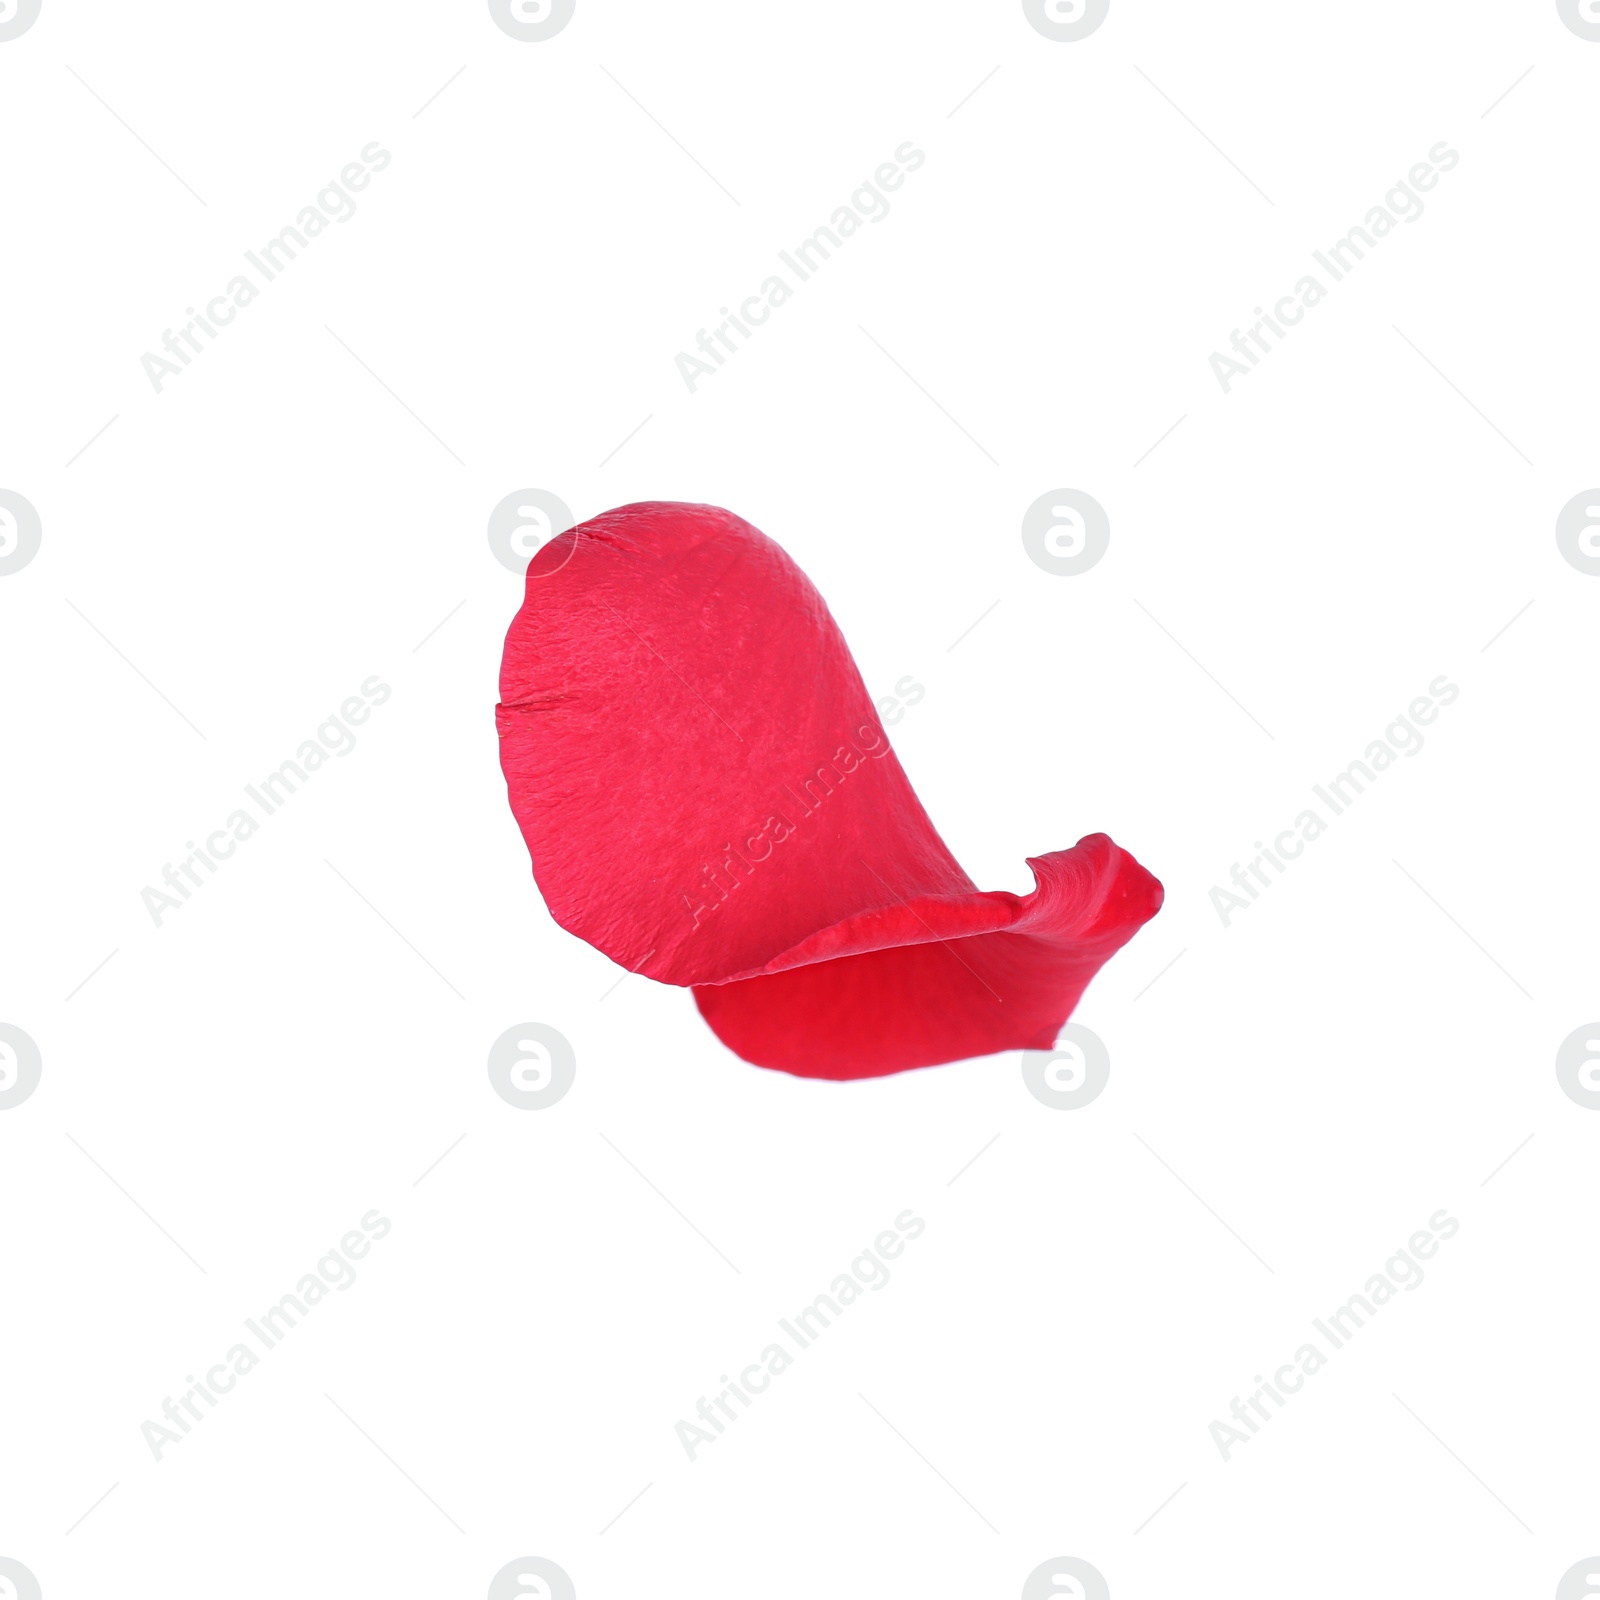 Photo of Tender red rose petal isolated on white